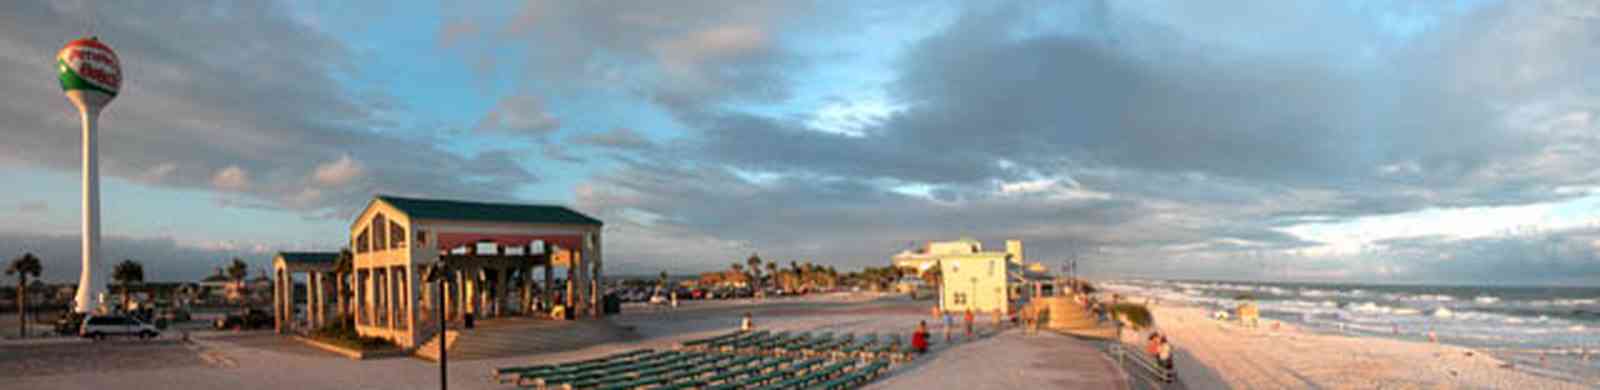 Pensacola-Beach:-Sunset_06.jpg:  pavillion, amphitheater, concert stage, benches, beach front, gulf of mexico, waves, surf, surfers, beach ball, water tower, parking lot, 